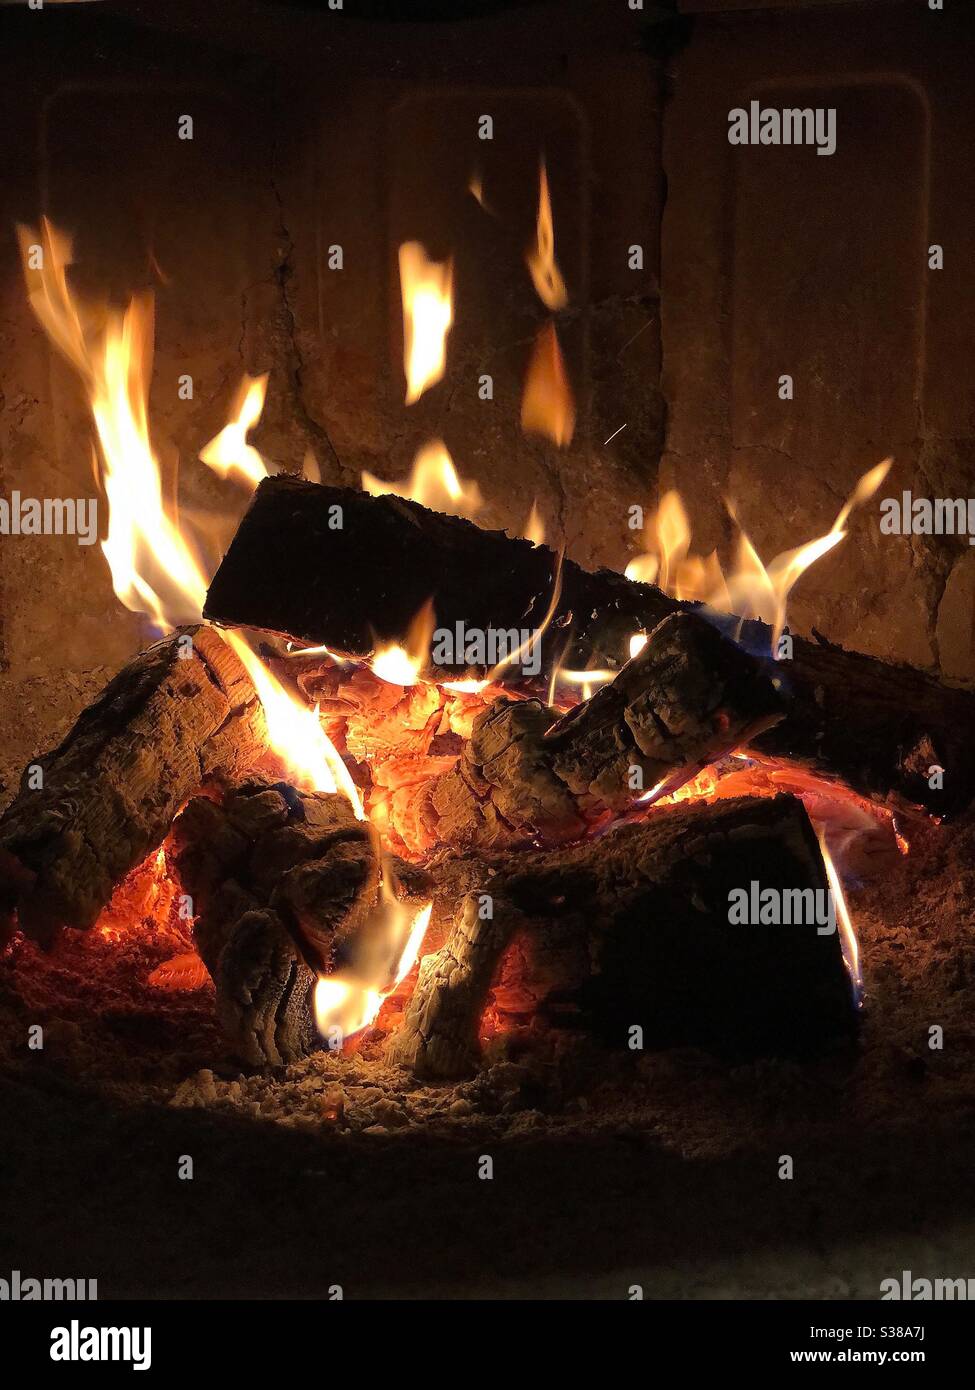 fire place Stock Photo